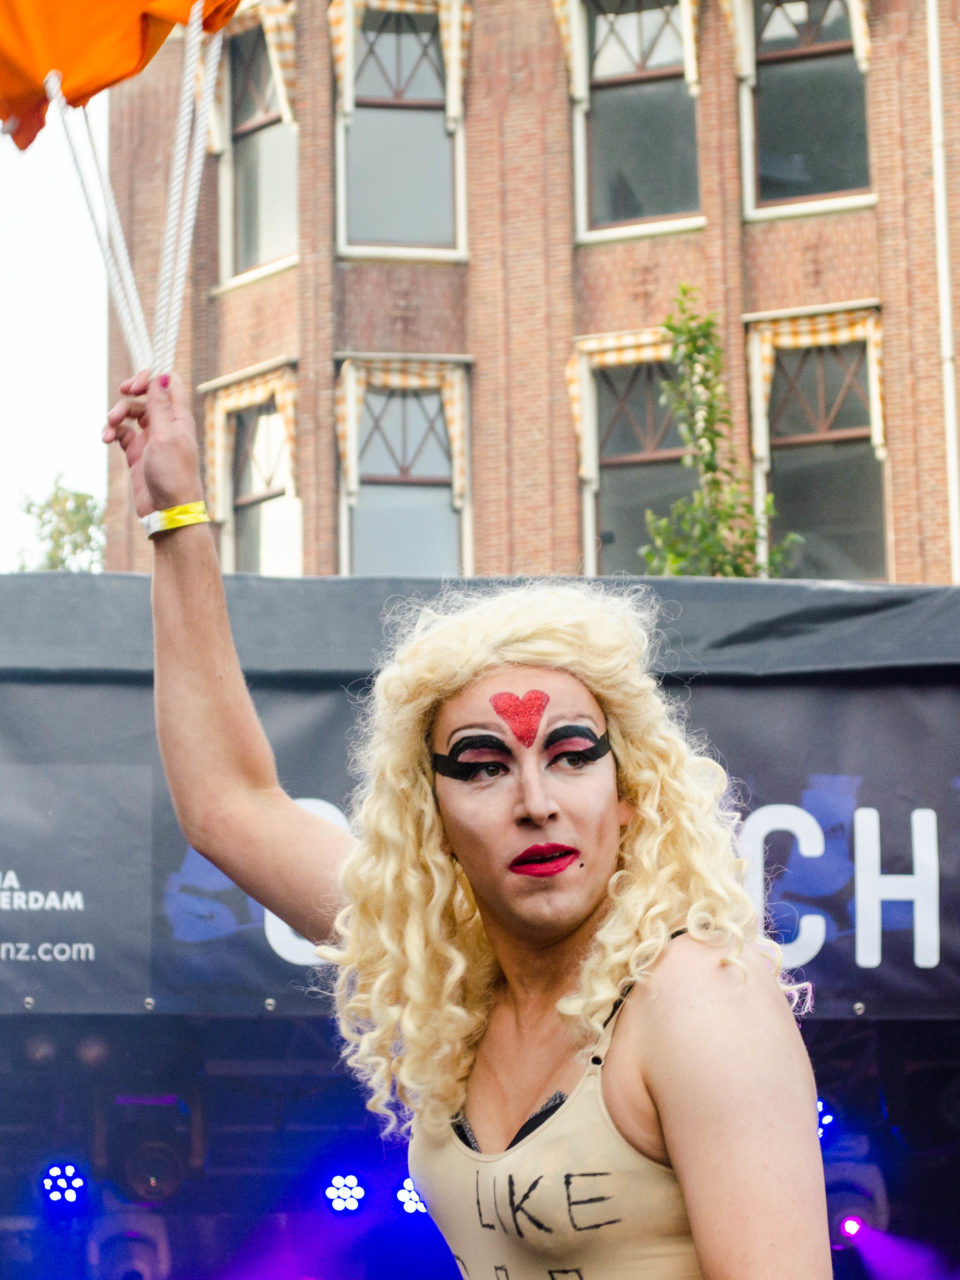 one of the queens competing in the Hand Bag Toss at the 2016 Drag Queen Olympics celebrating Gay Pride in Amsterdam